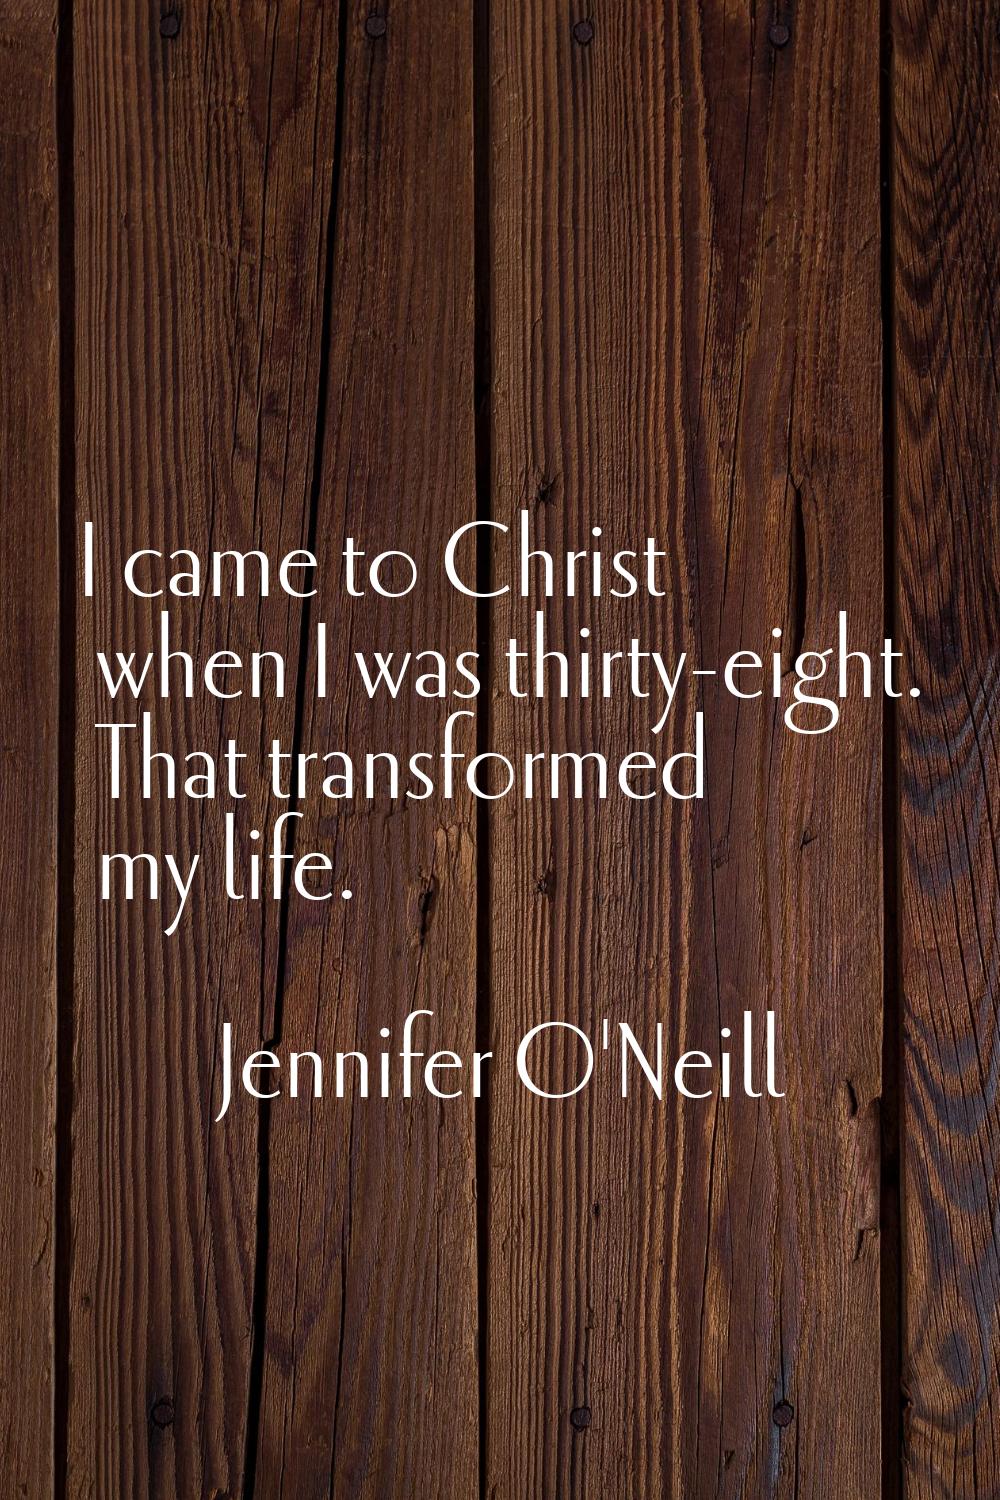 I came to Christ when I was thirty-eight. That transformed my life.